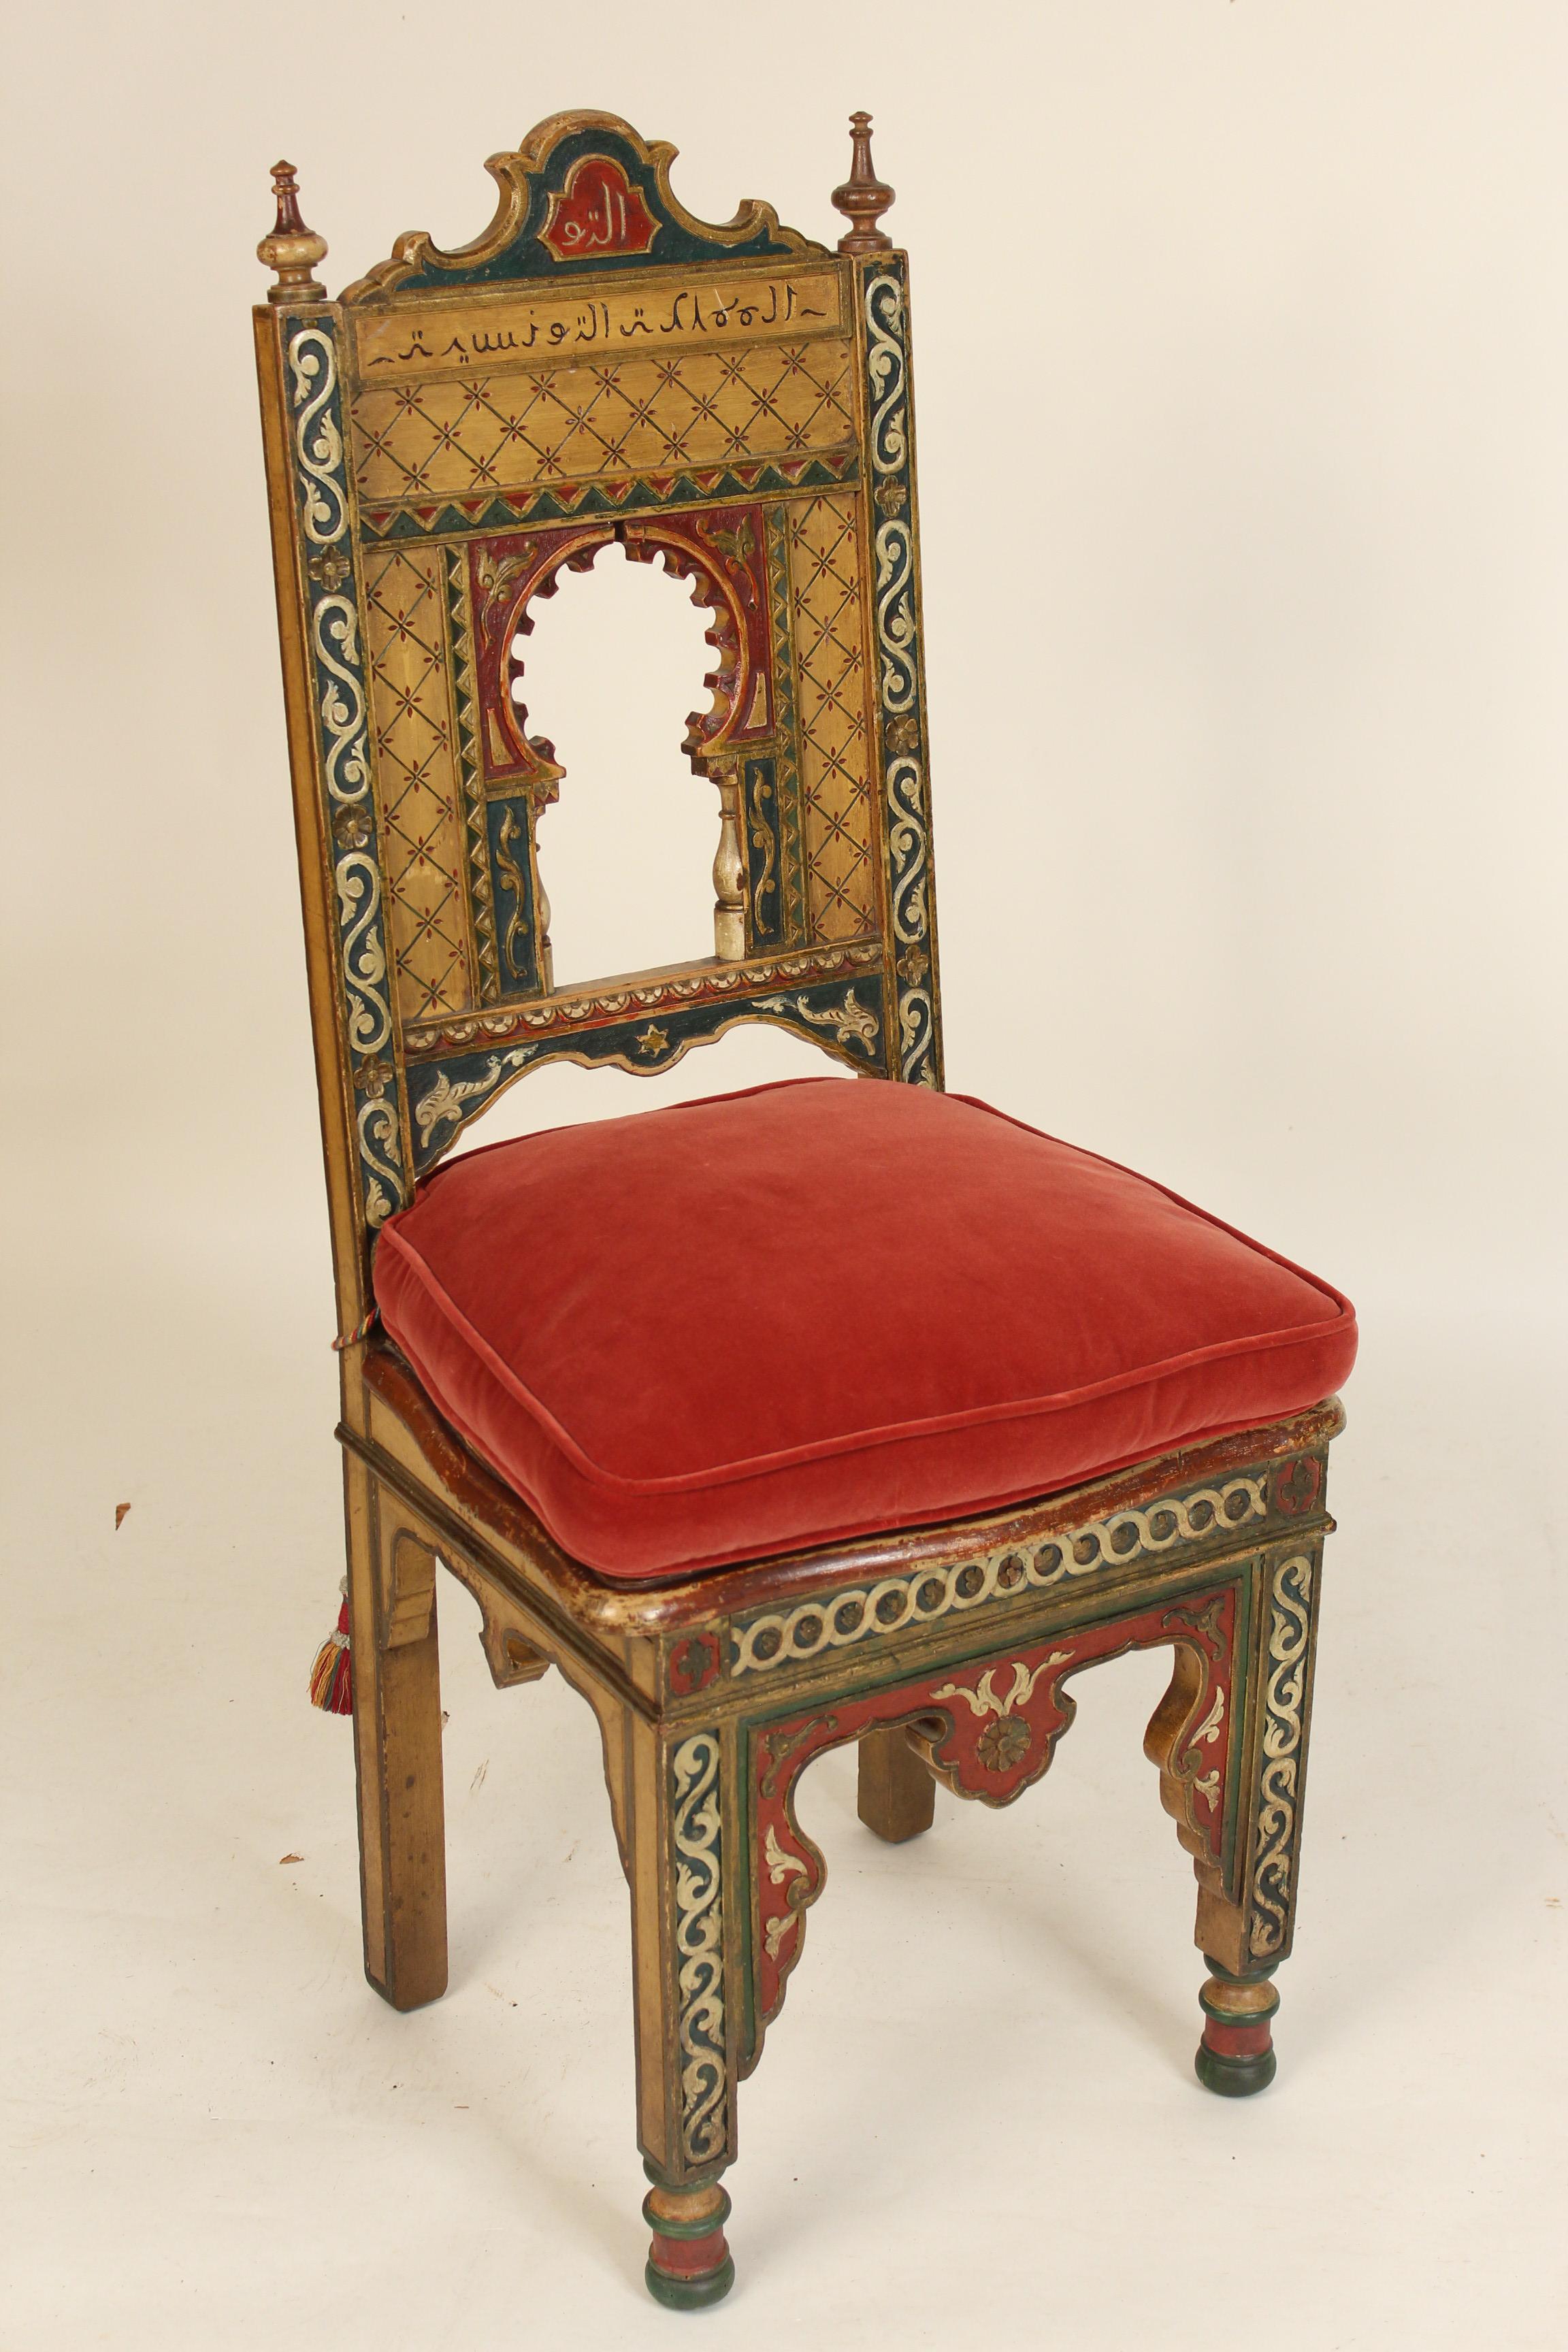 Set of 4 painted and carved middle Eastern side chairs, circa 1930s. Height of seat without cushion 17